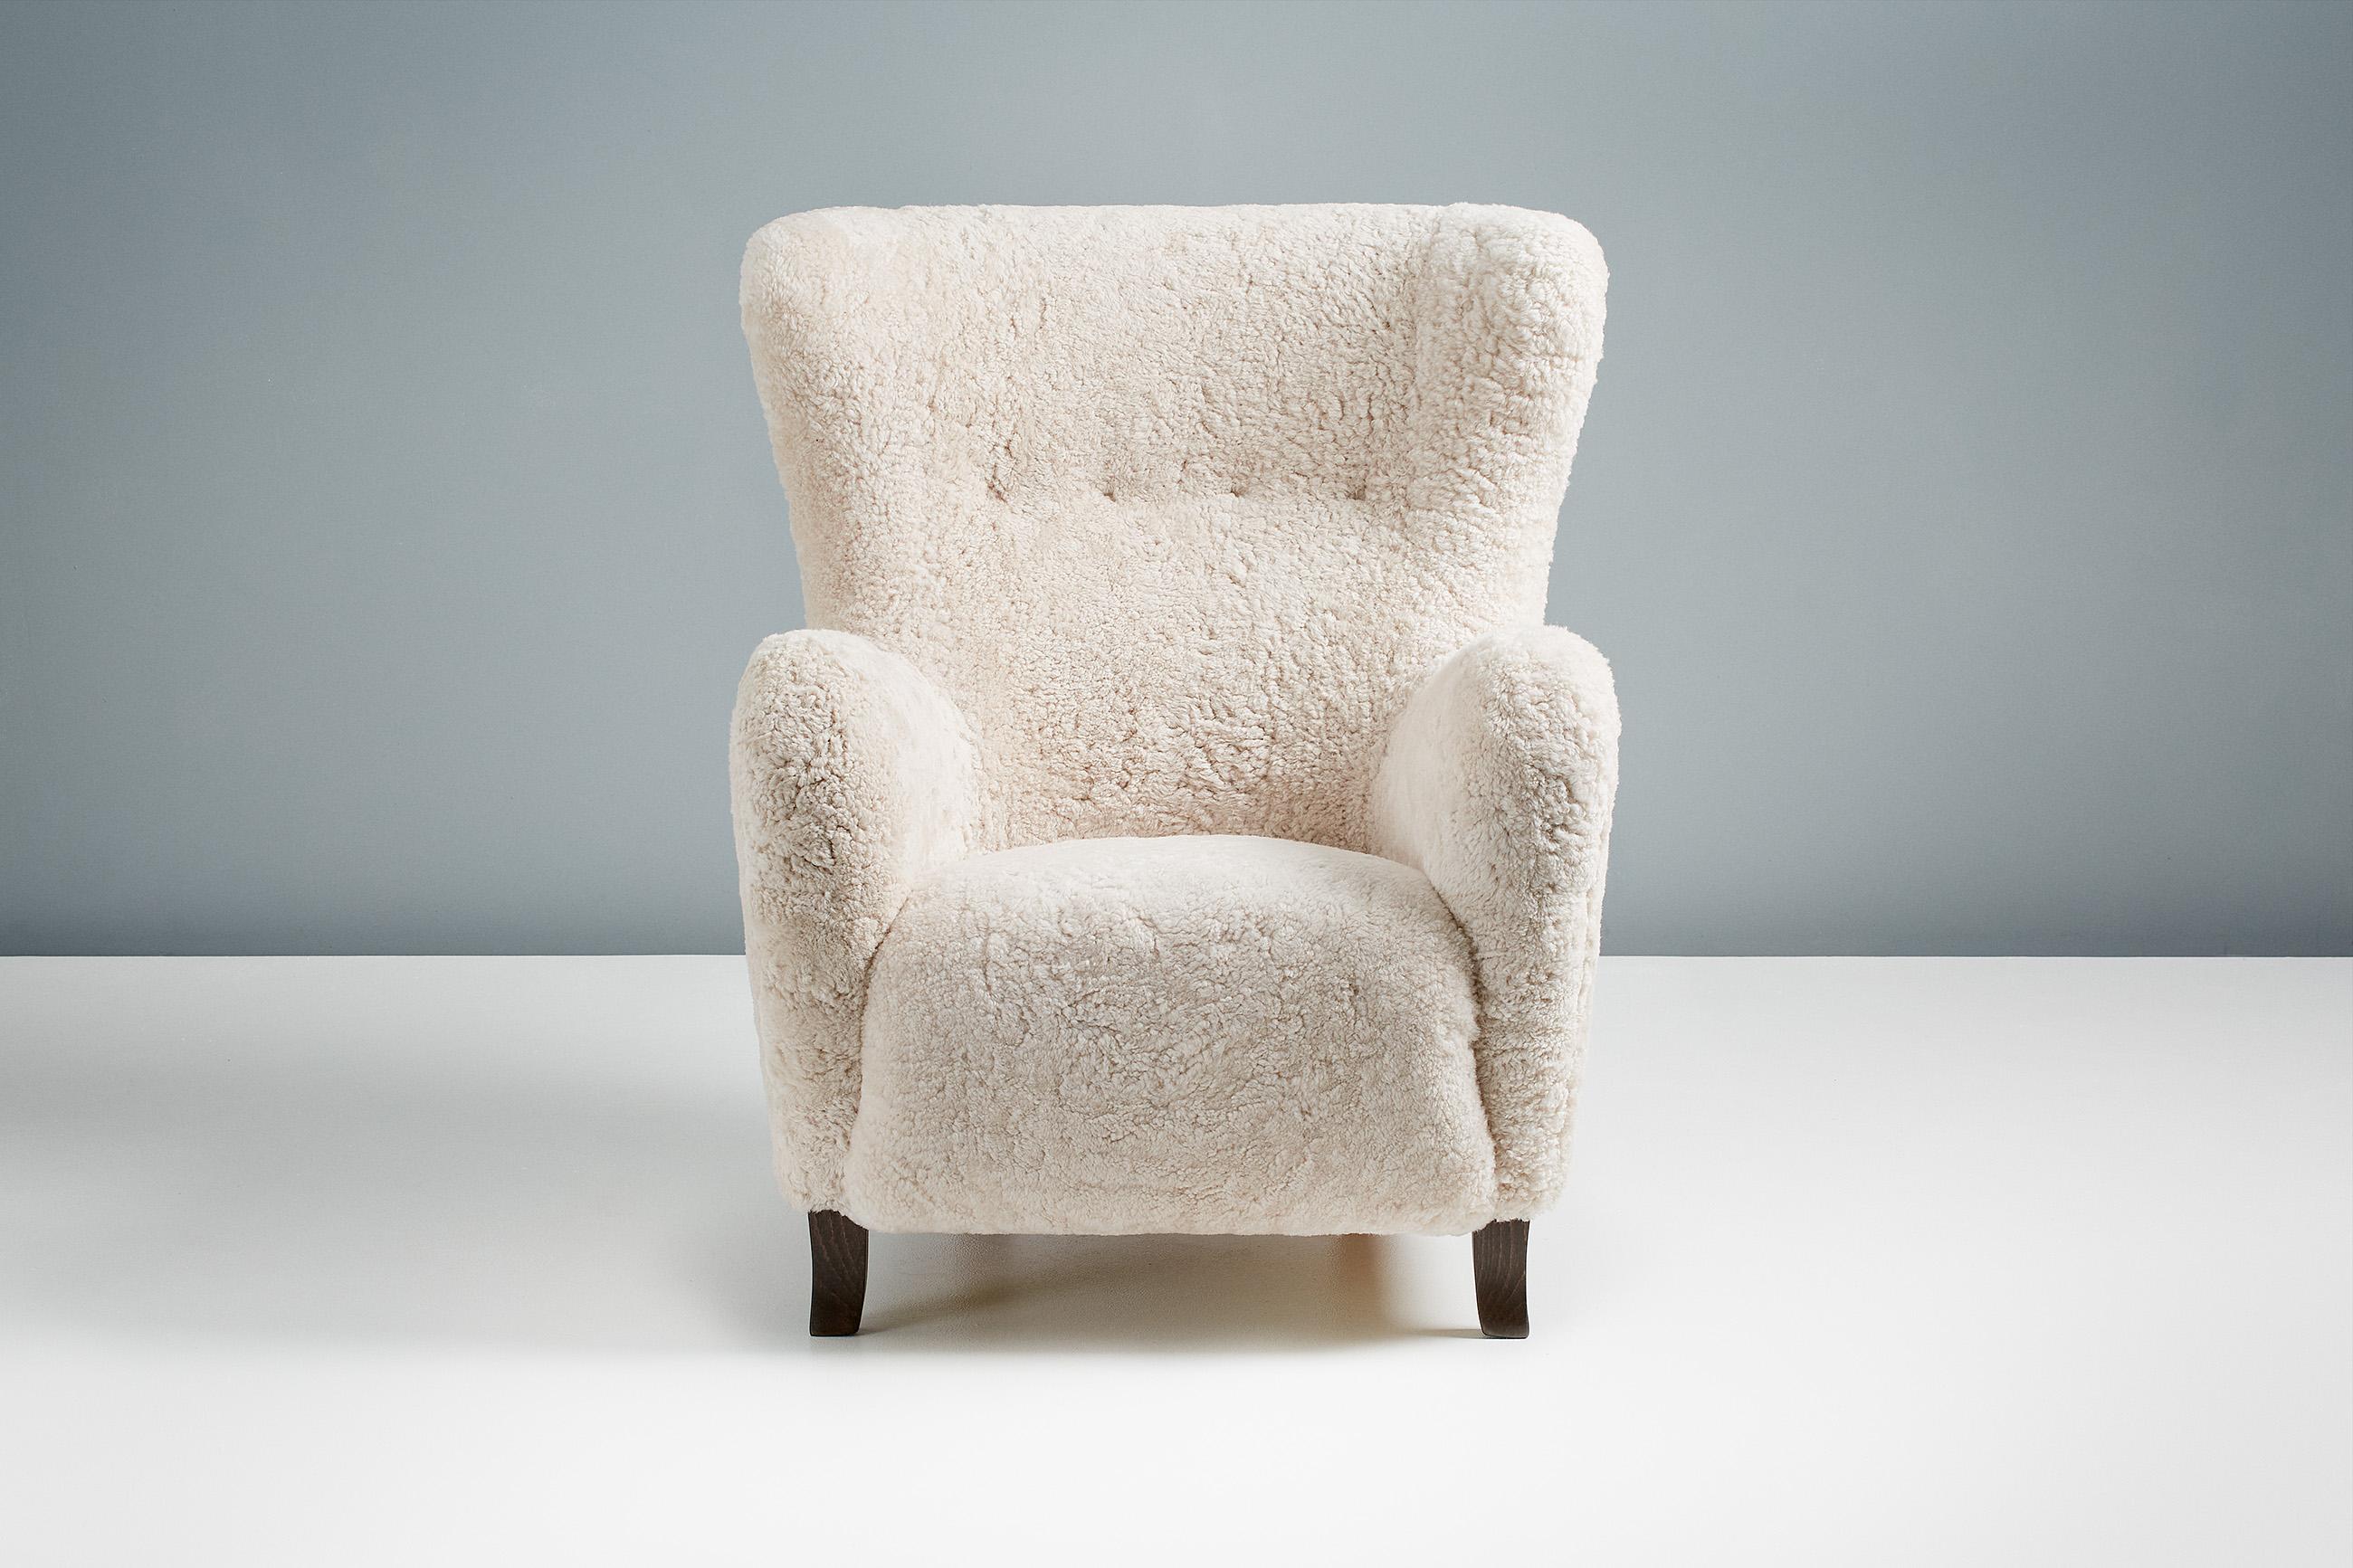 Dagmar - Sampo Wing Chair & Ottoman

A custom-made wing chair and ottoman developed & produced at our workshops in London using the highest quality materials. The frame is built from solid tulipwood with a fully sprung seat. The Sampo chair is